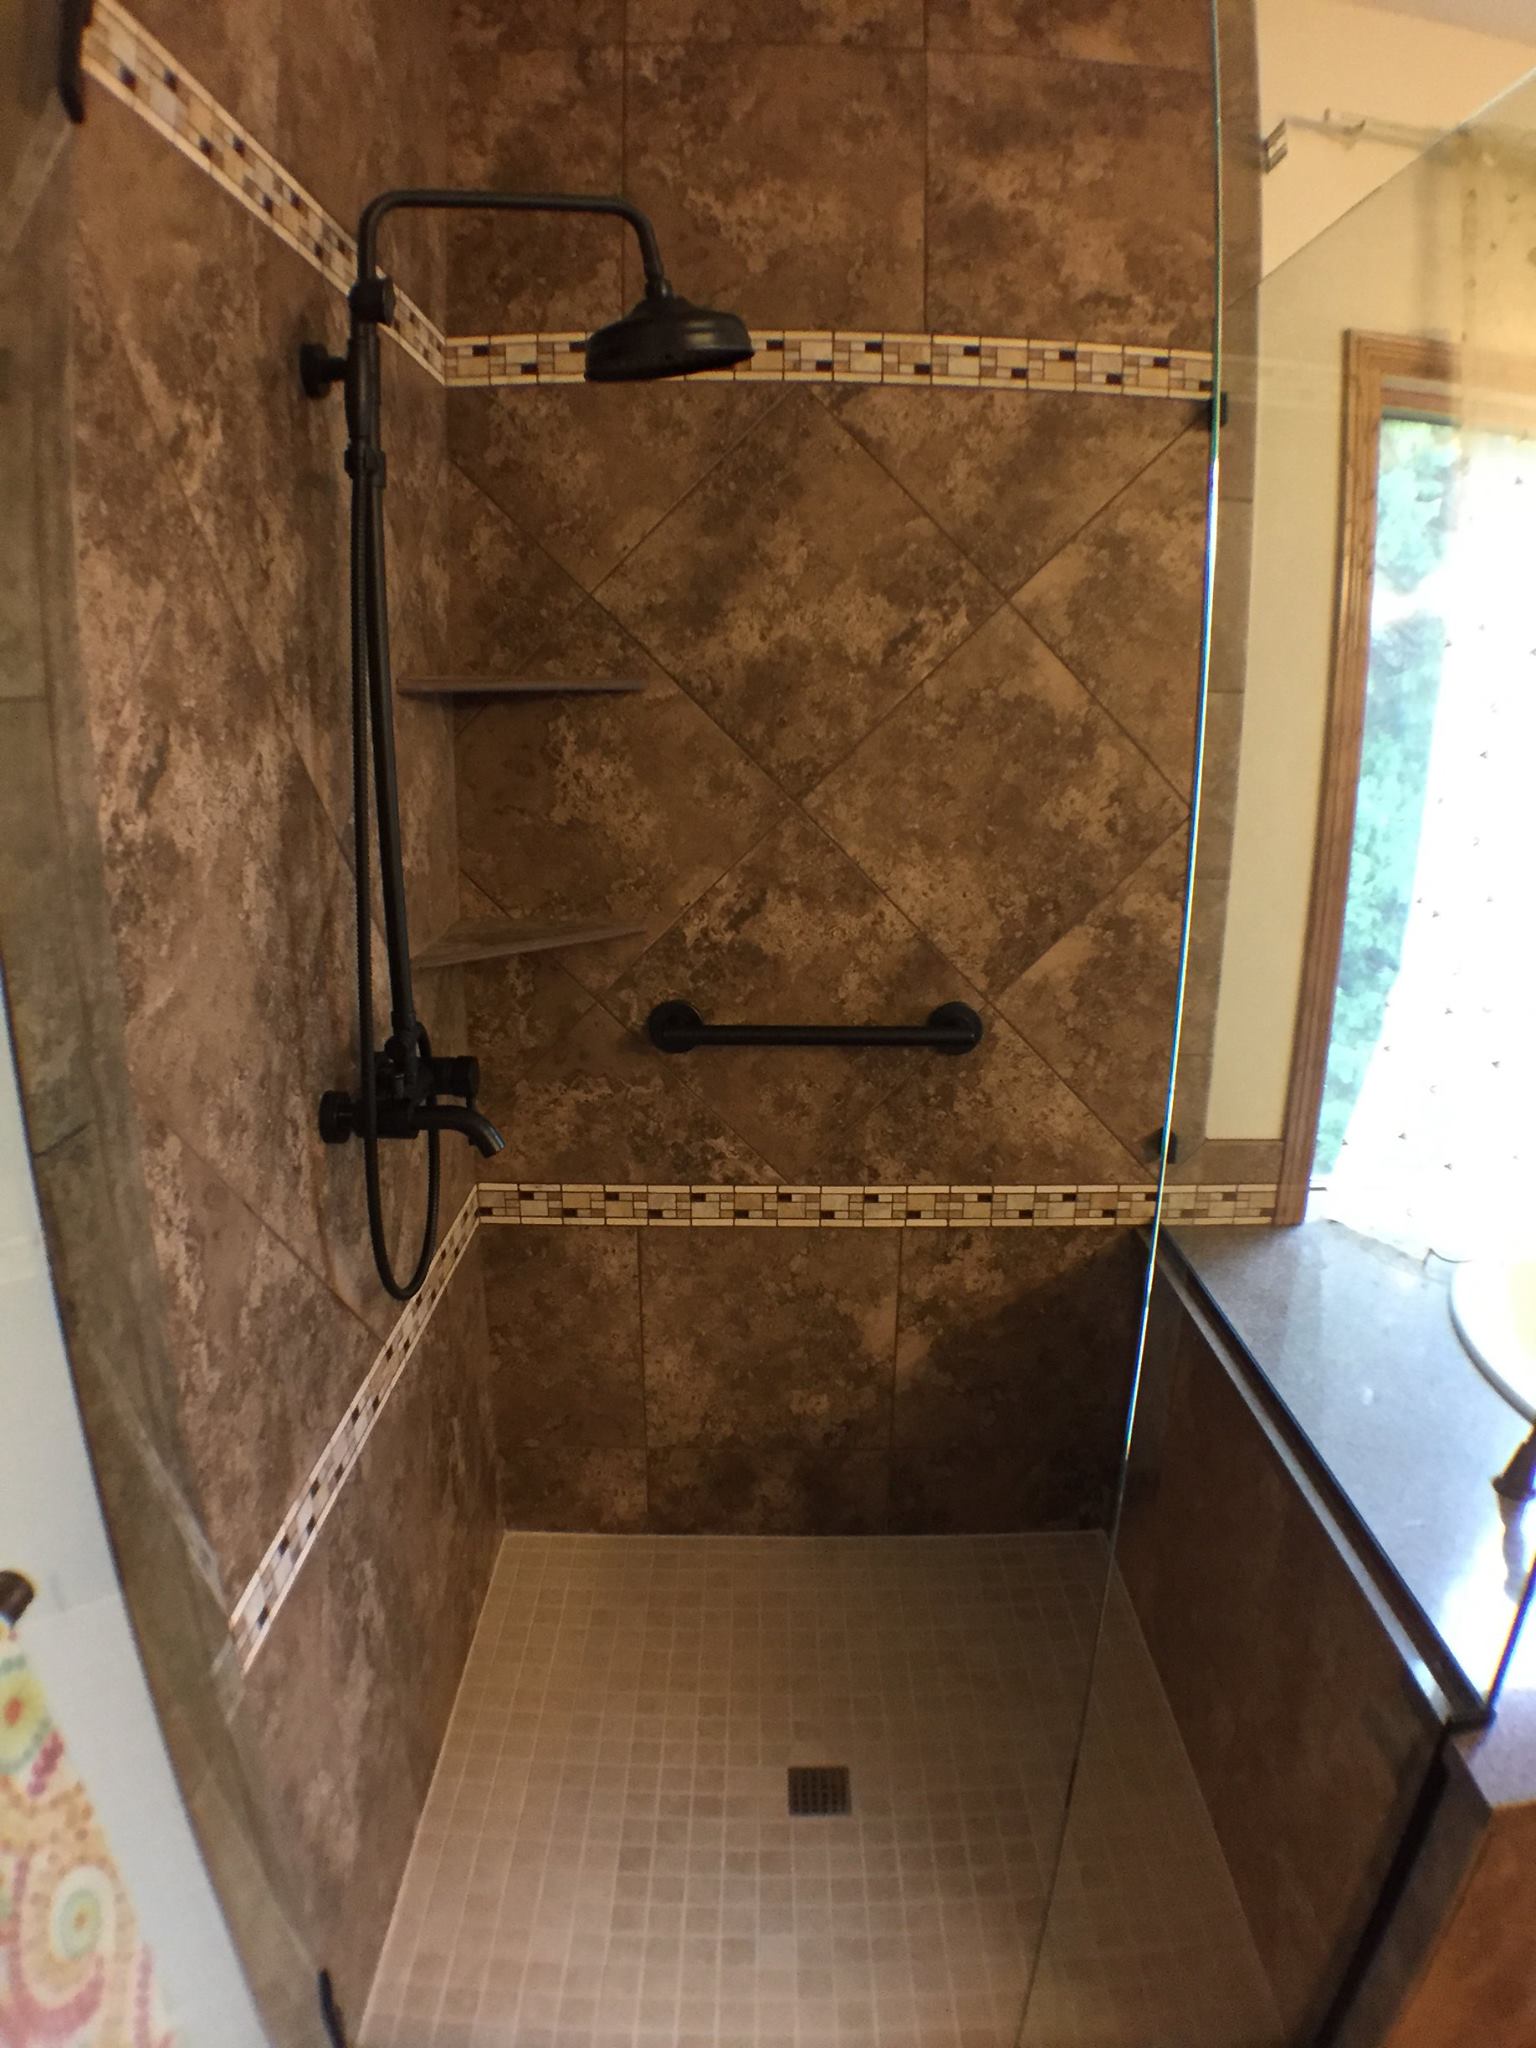 Shower with bronze fixtures, dark brown marble tile, and tan glass tile accents 